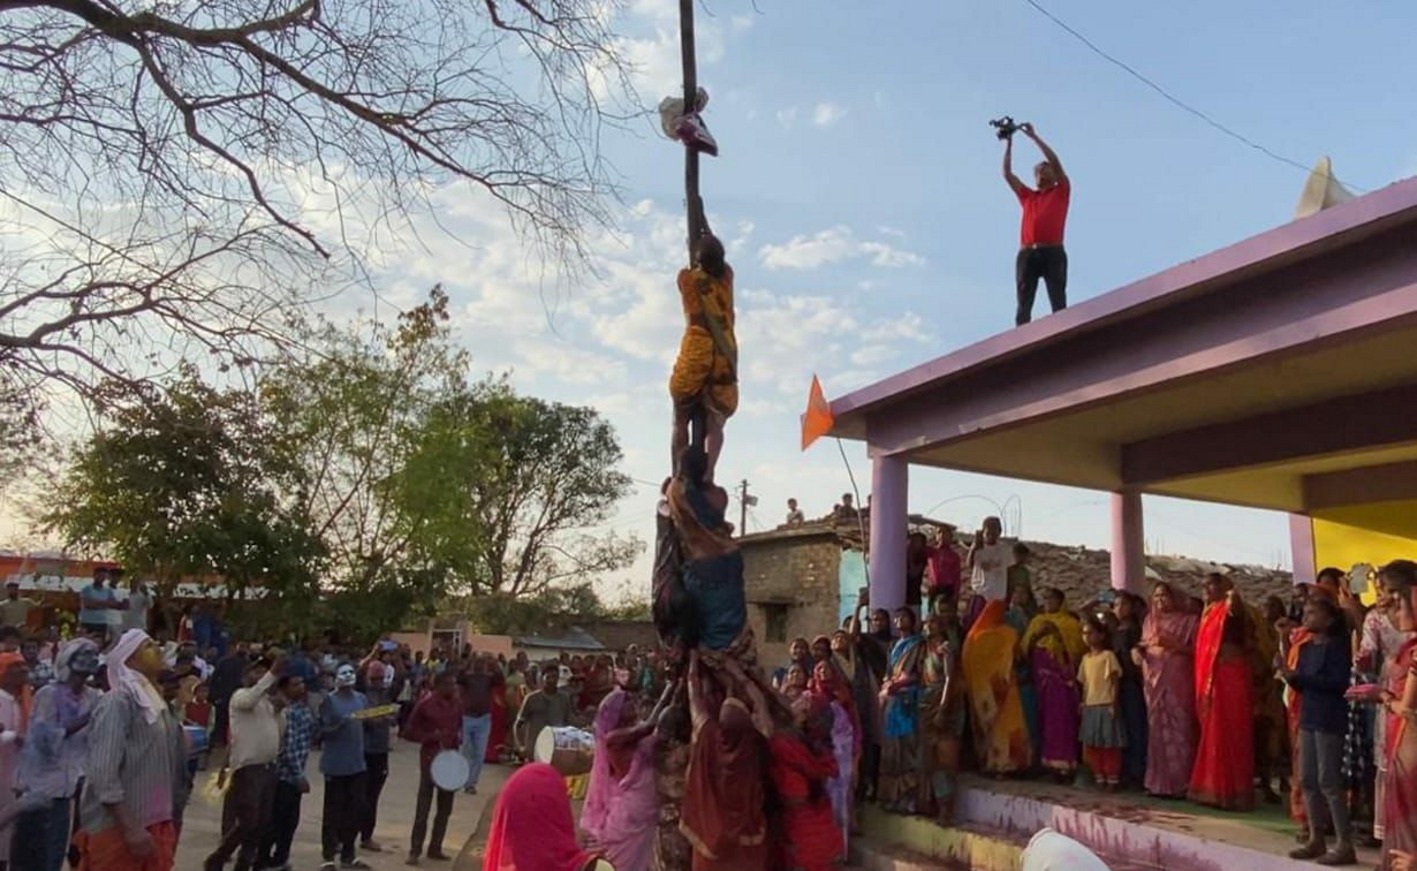 A village in Madhya Pradesh where Holi is played in a unique style on the day of Bhaidooj.